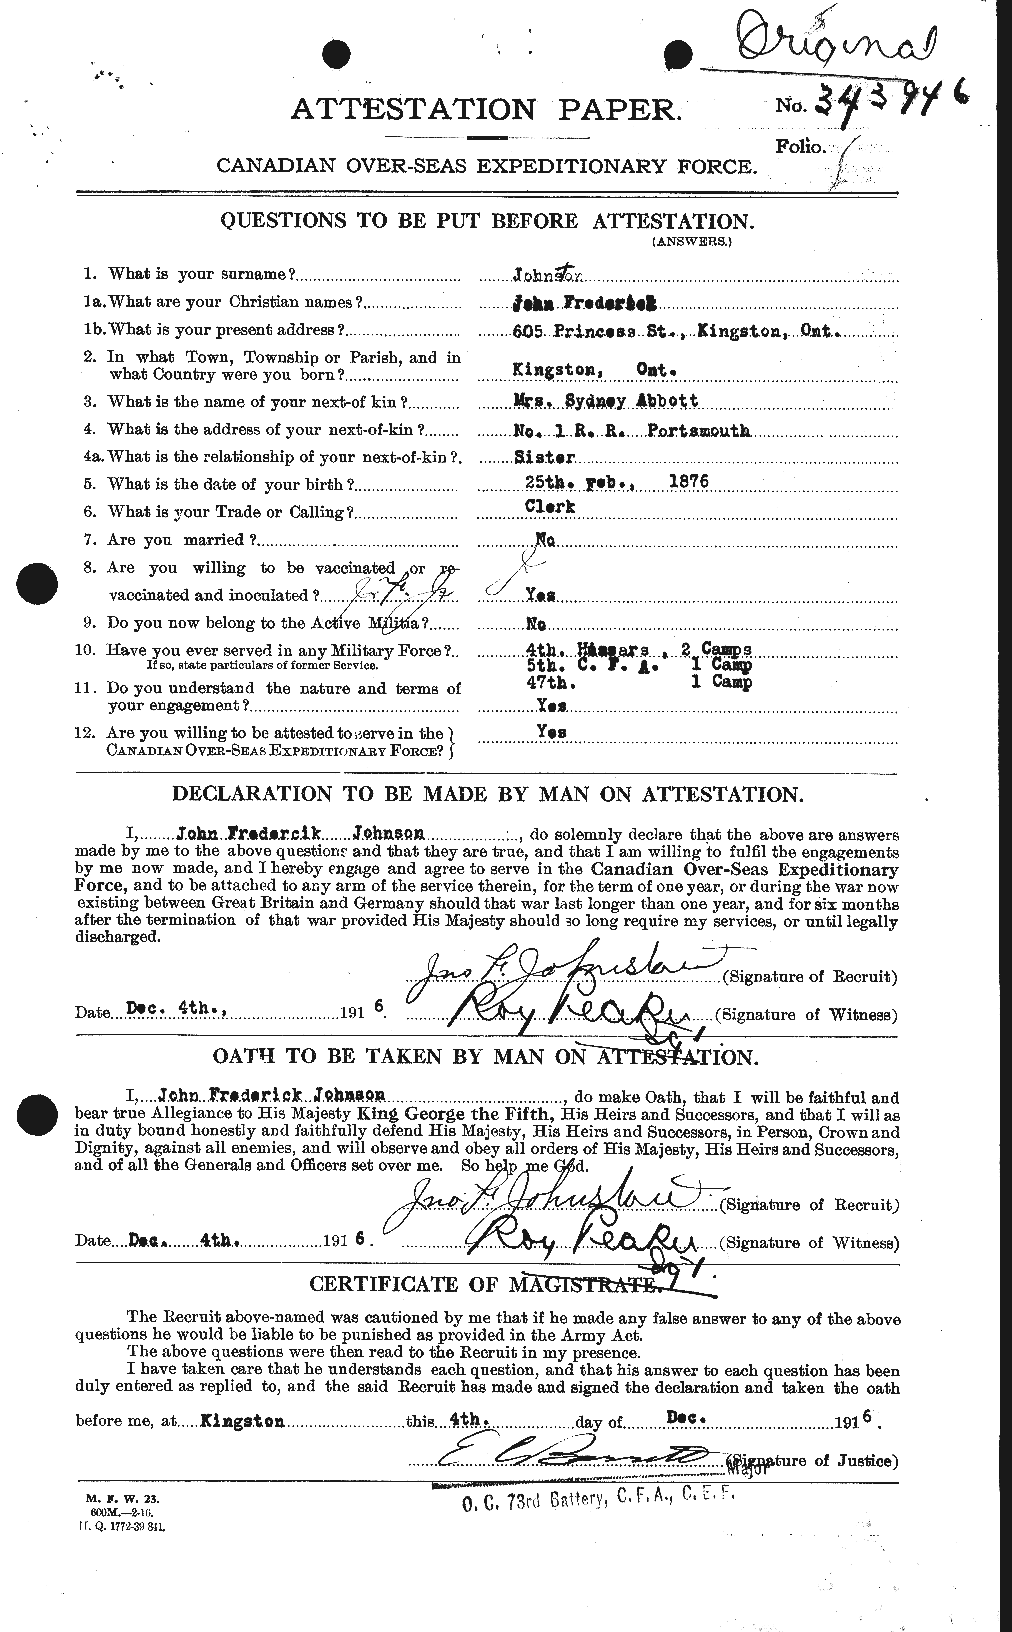 Personnel Records of the First World War - CEF 422830a